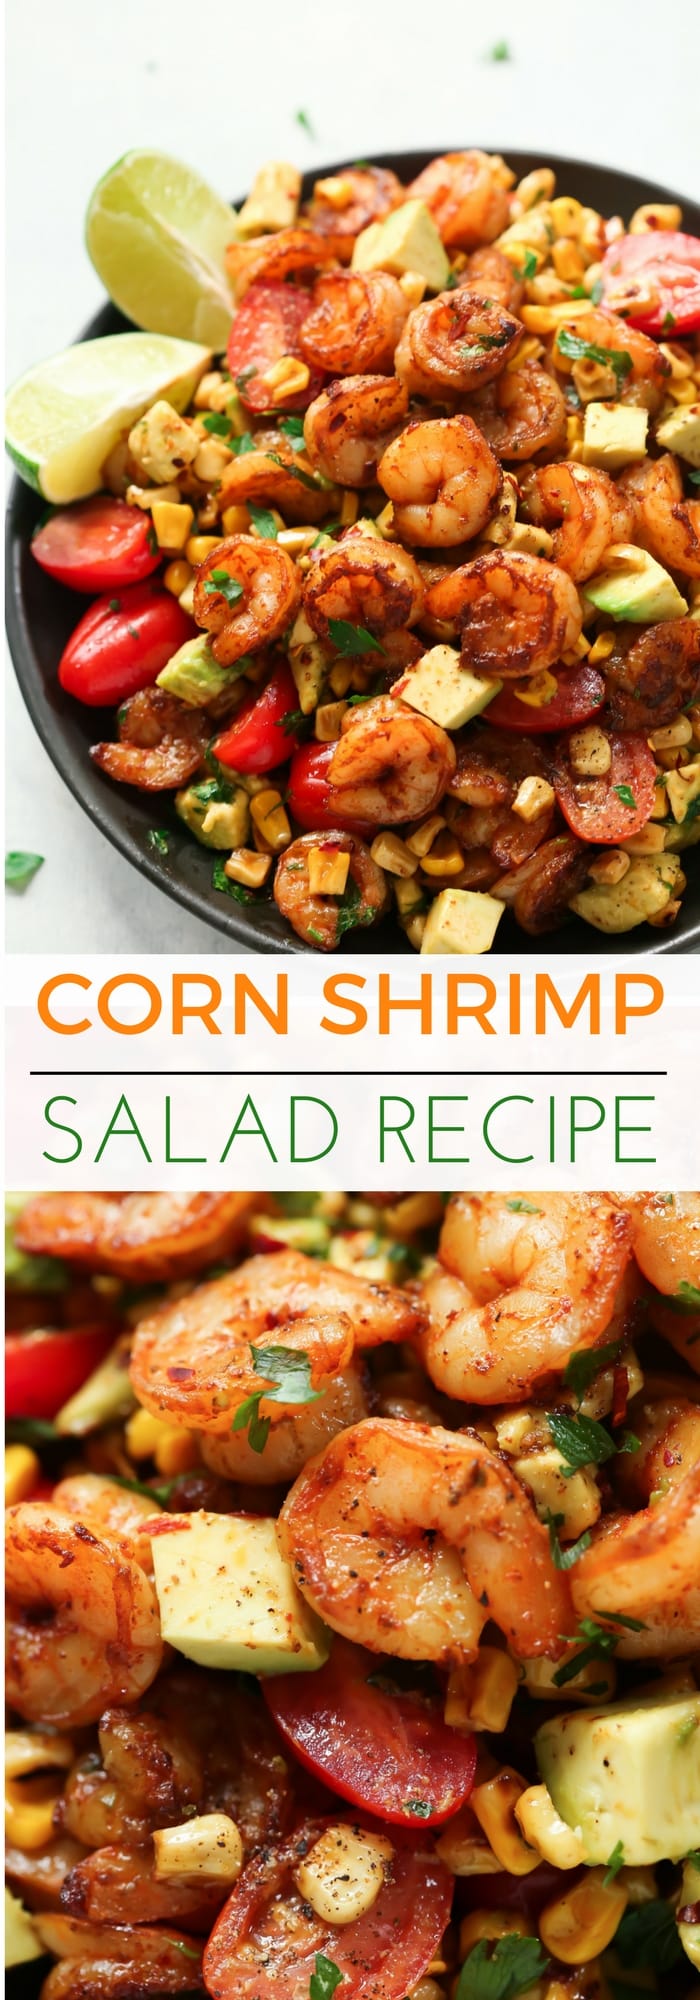 Enjoy this refreshingCorn Shrimp Salad - Corn Shrimp Salad Recipe with a light lime dressing as a side for any meal during summertime. 